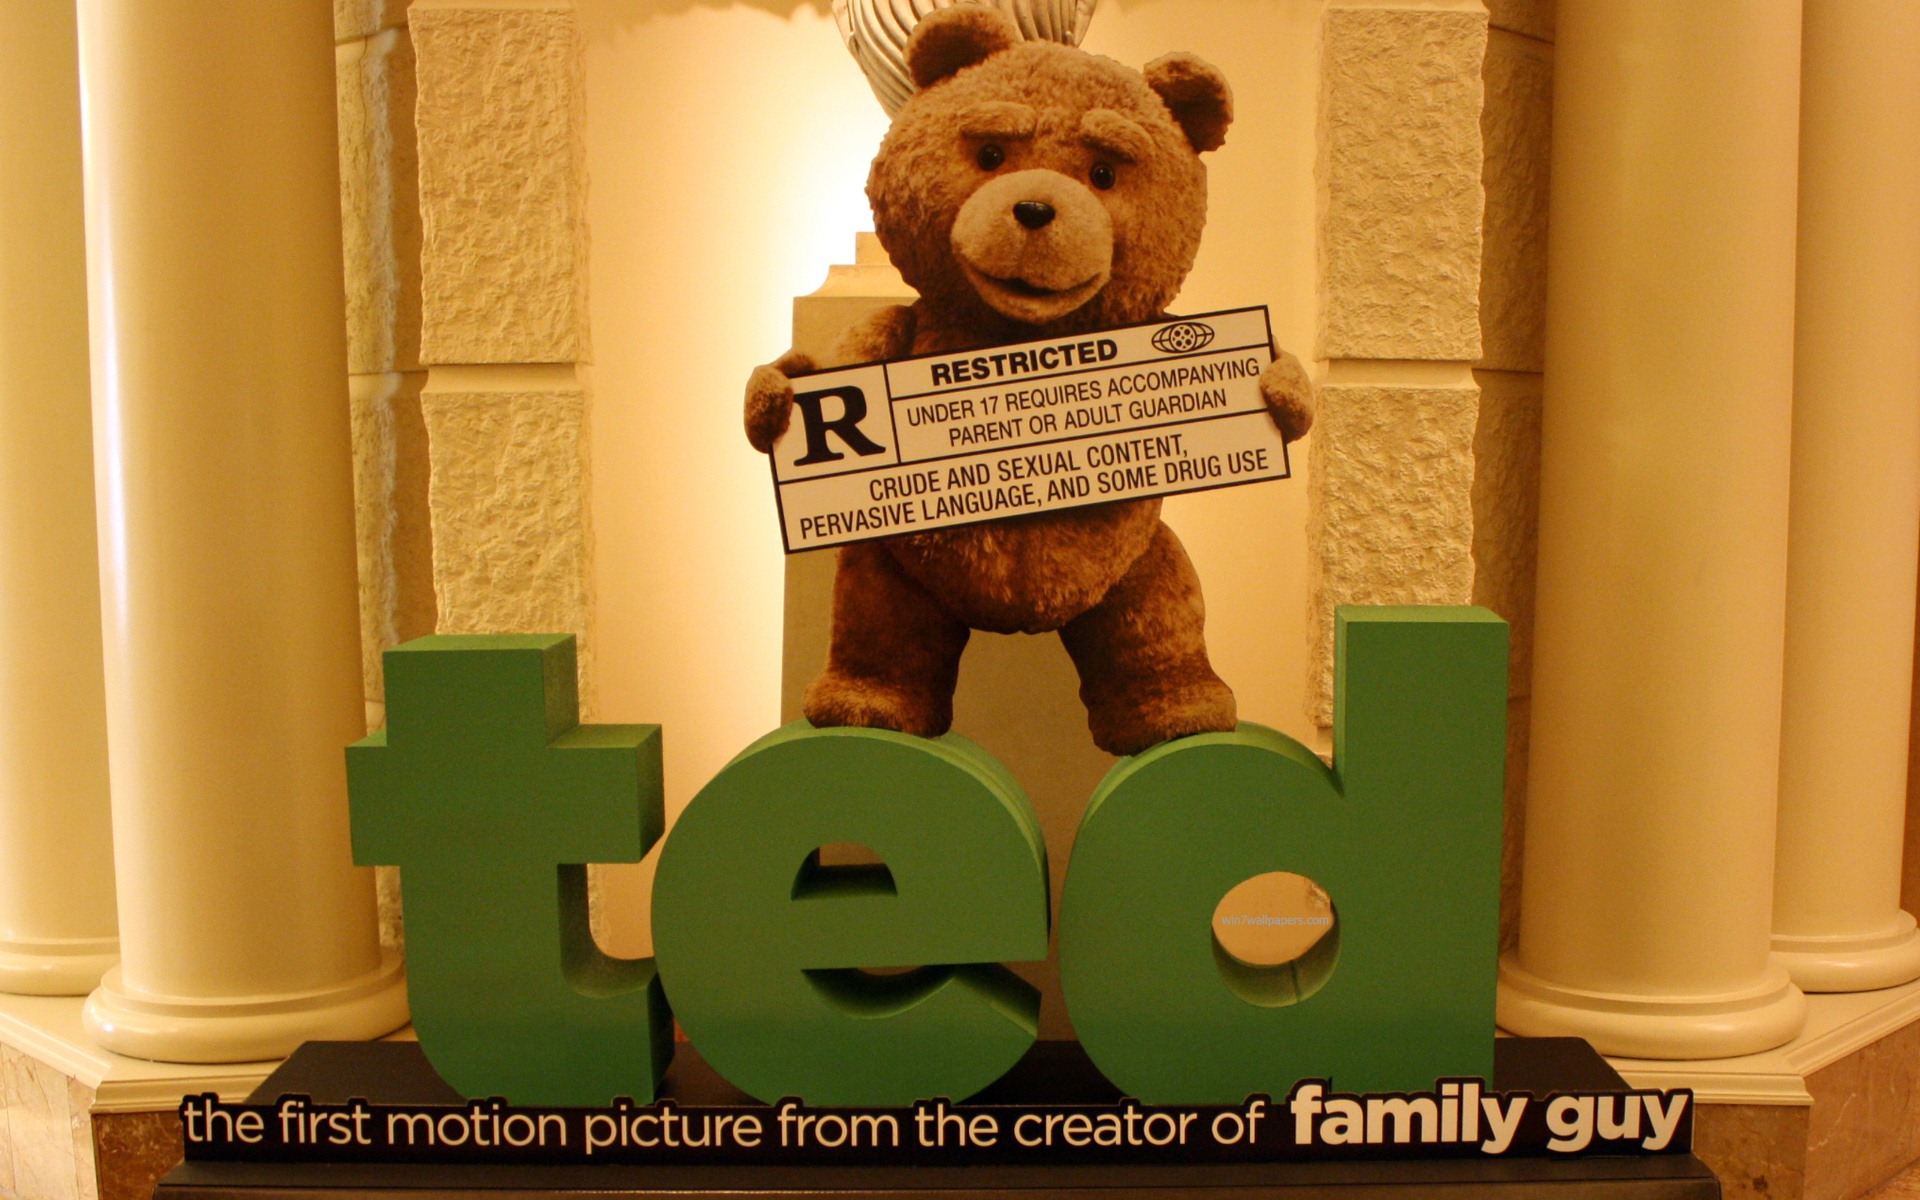 Ted 2012 HD movie wallpapers #7 - 1920x1200